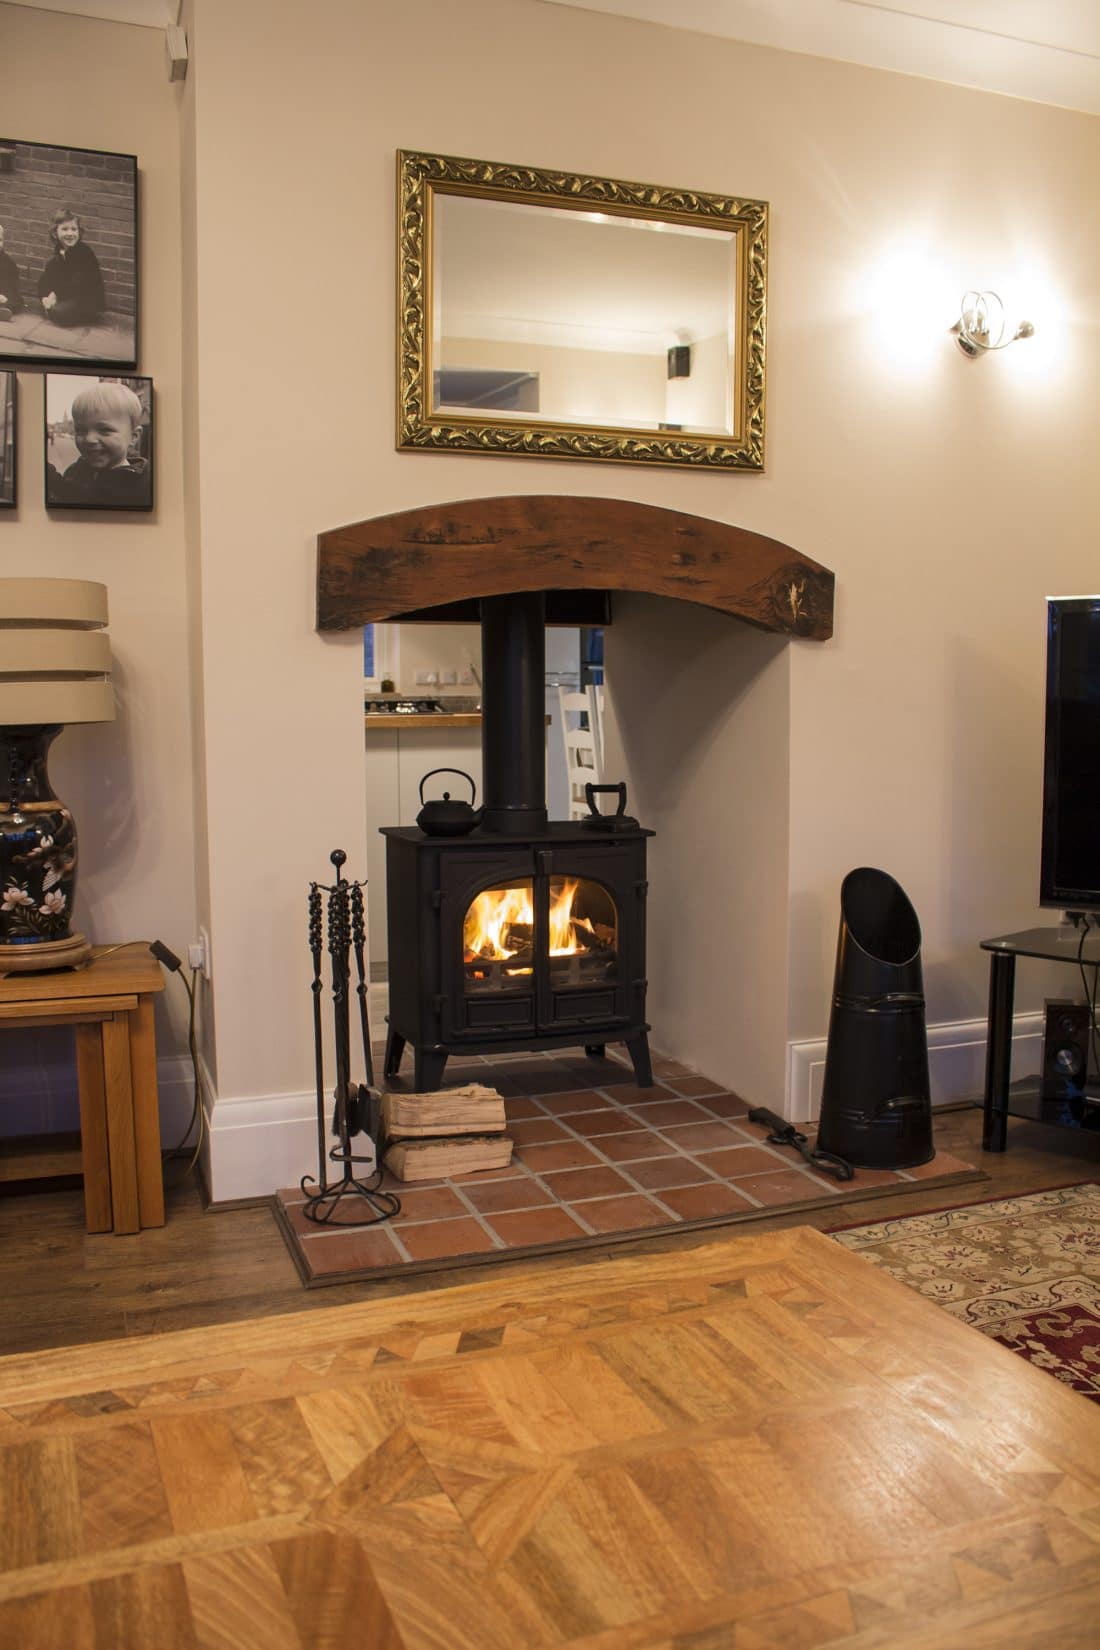 install by ignite stoves & fires